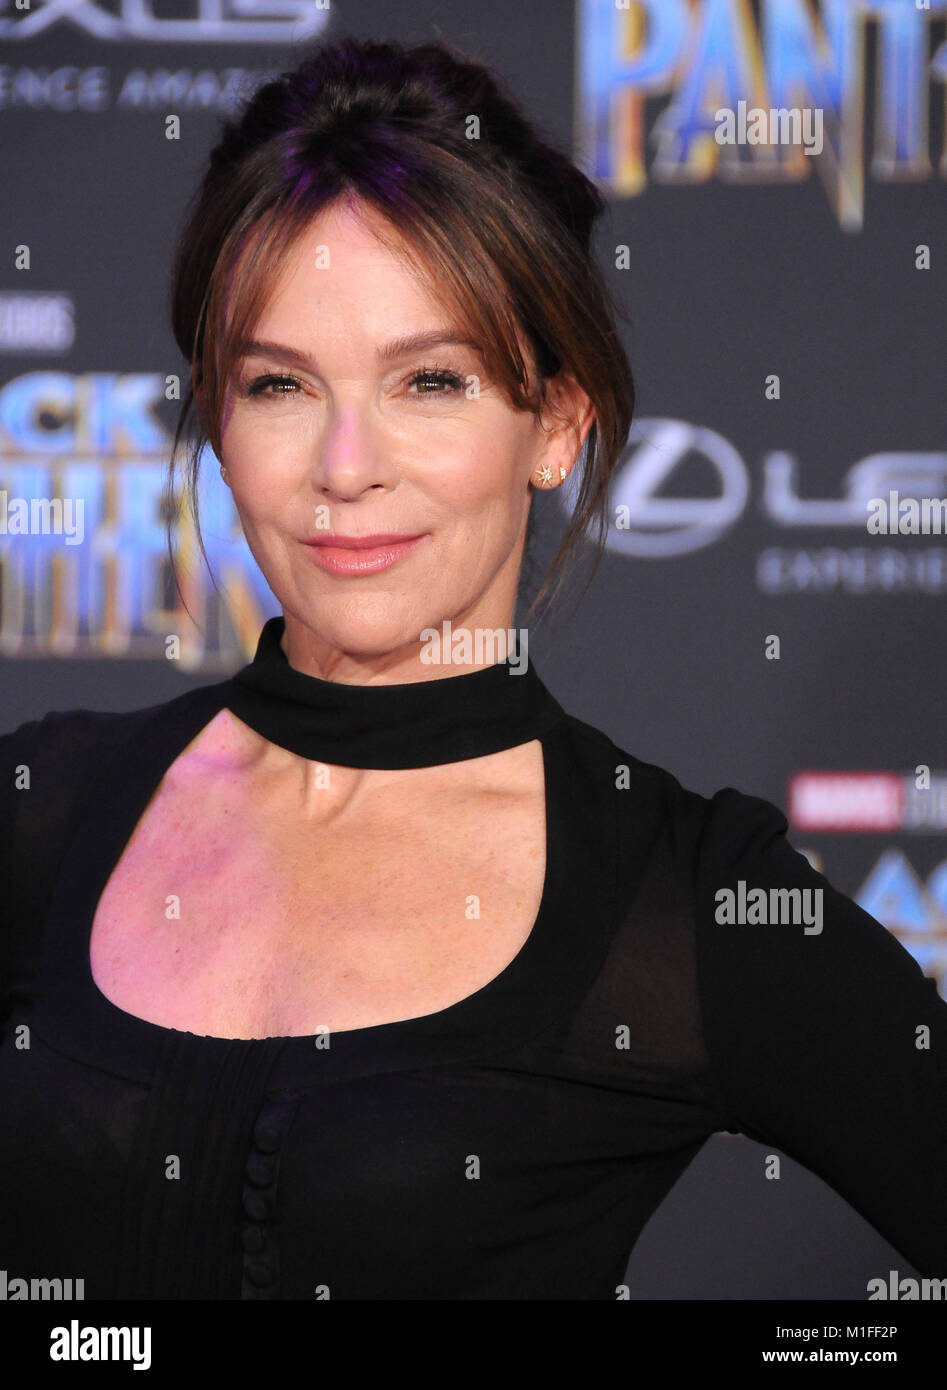 Los Angeles, USA. 29th Jan, 2018. Actress Jennifer Grey attends the World Premiere of Marvel Studios' 'Black Panther' at Dolby Theatre on January 29, 2018 in Los Angeles, California. Credit: Barry King/Alamy Live News Stock Photo